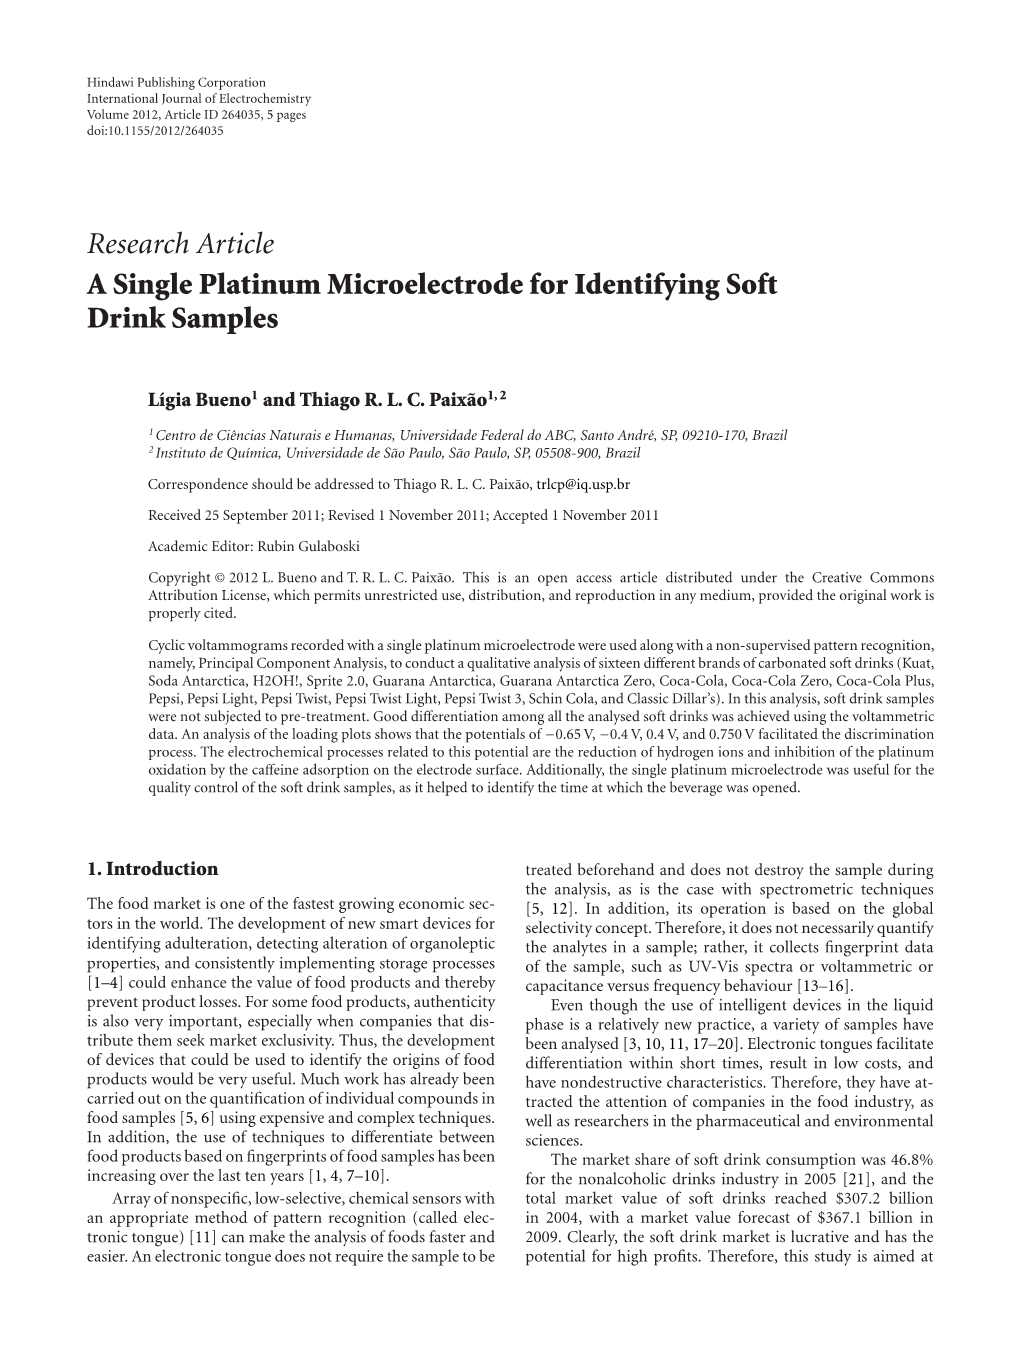 A Single Platinum Microelectrode for Identifying Soft Drink Samples